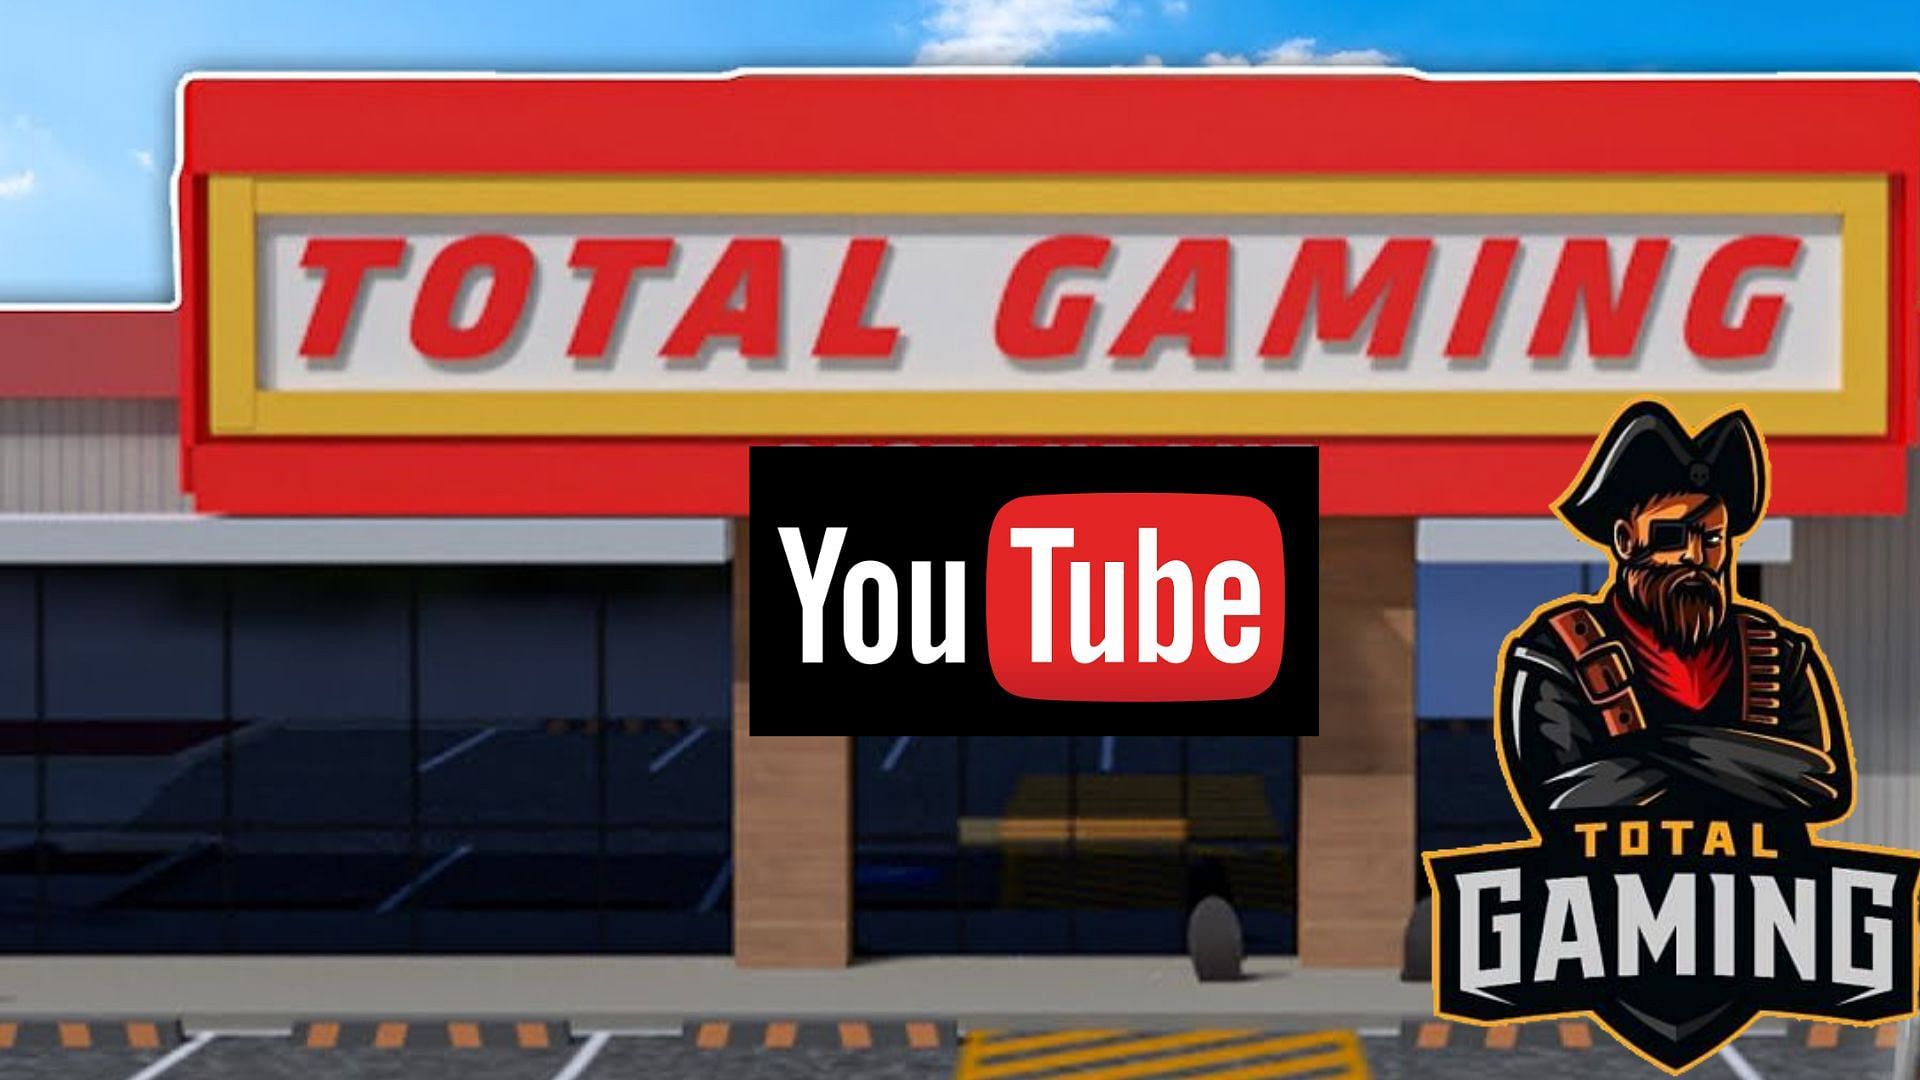 Total Gaming received several copyright strikes on his YouTube channel (Image via Sportskeeda)